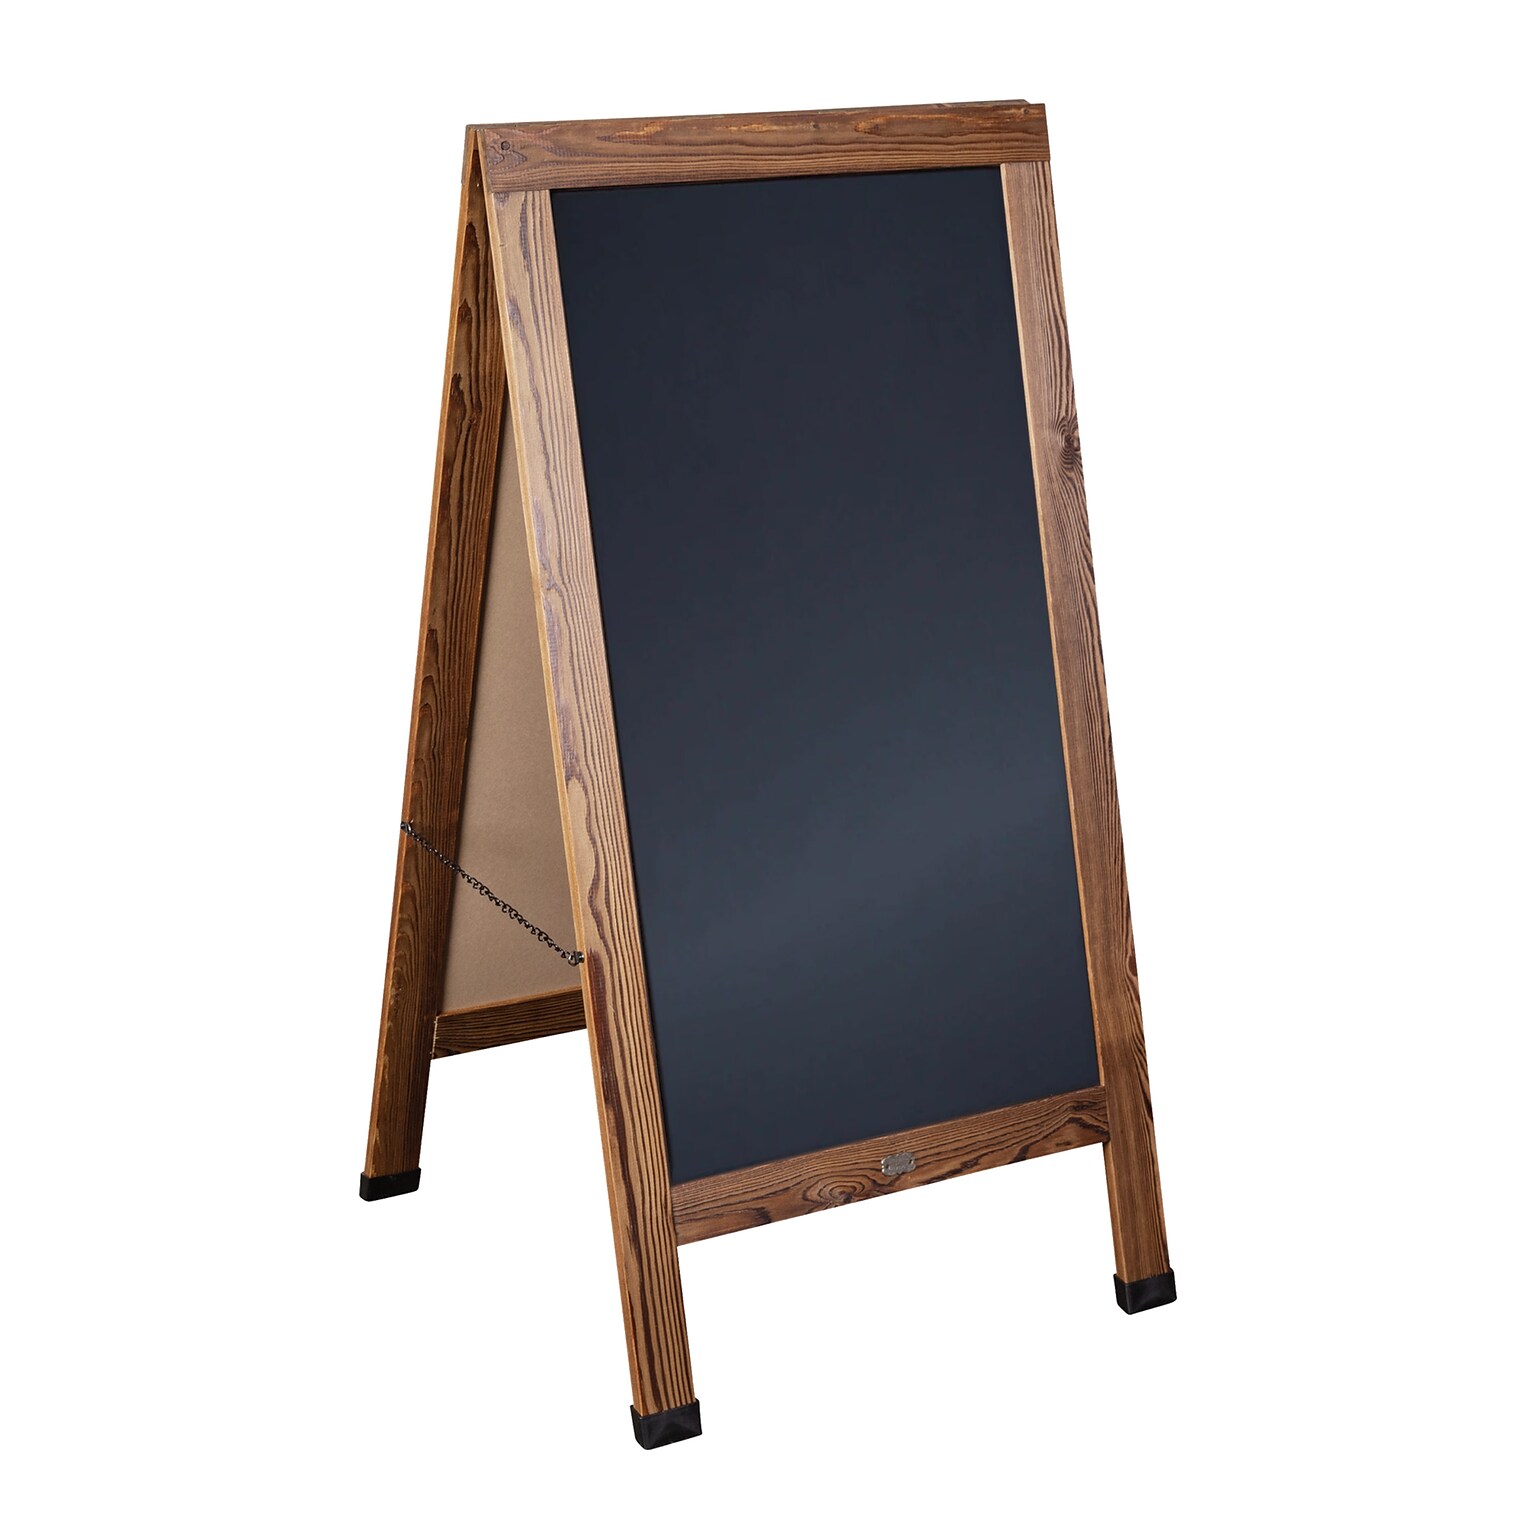 Flash Furniture Canterbury Indoor/Outdoor Chalkboard Sign Set, Torched Brown, 48H x 24W (HGWACB4824TORCH)